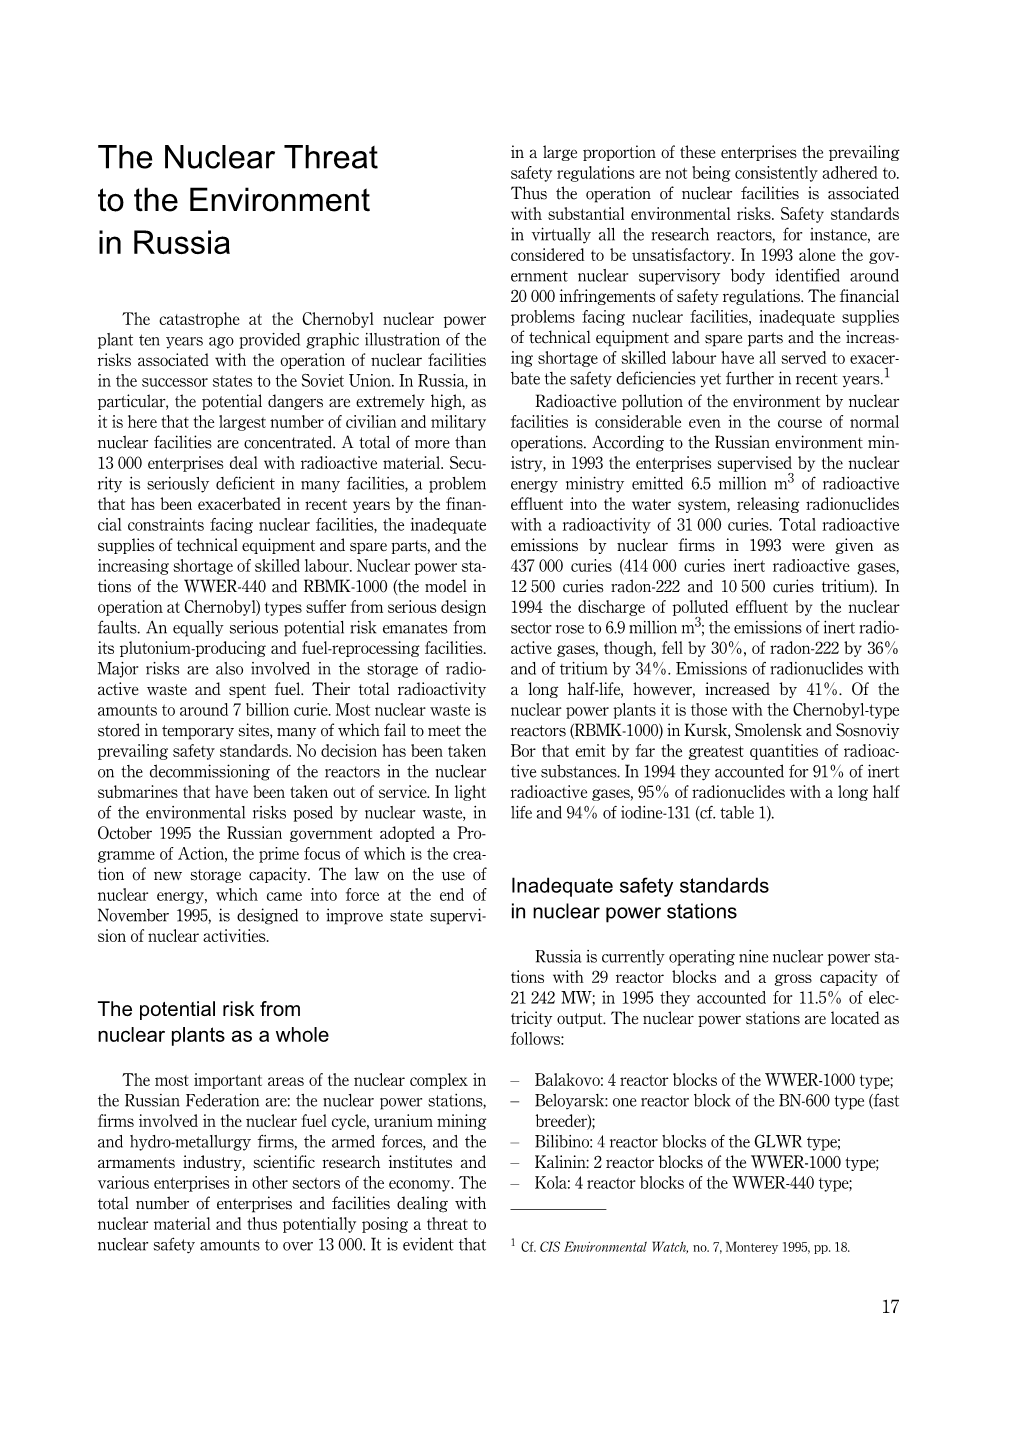 The Nuclear Threat to the Environment in Russia